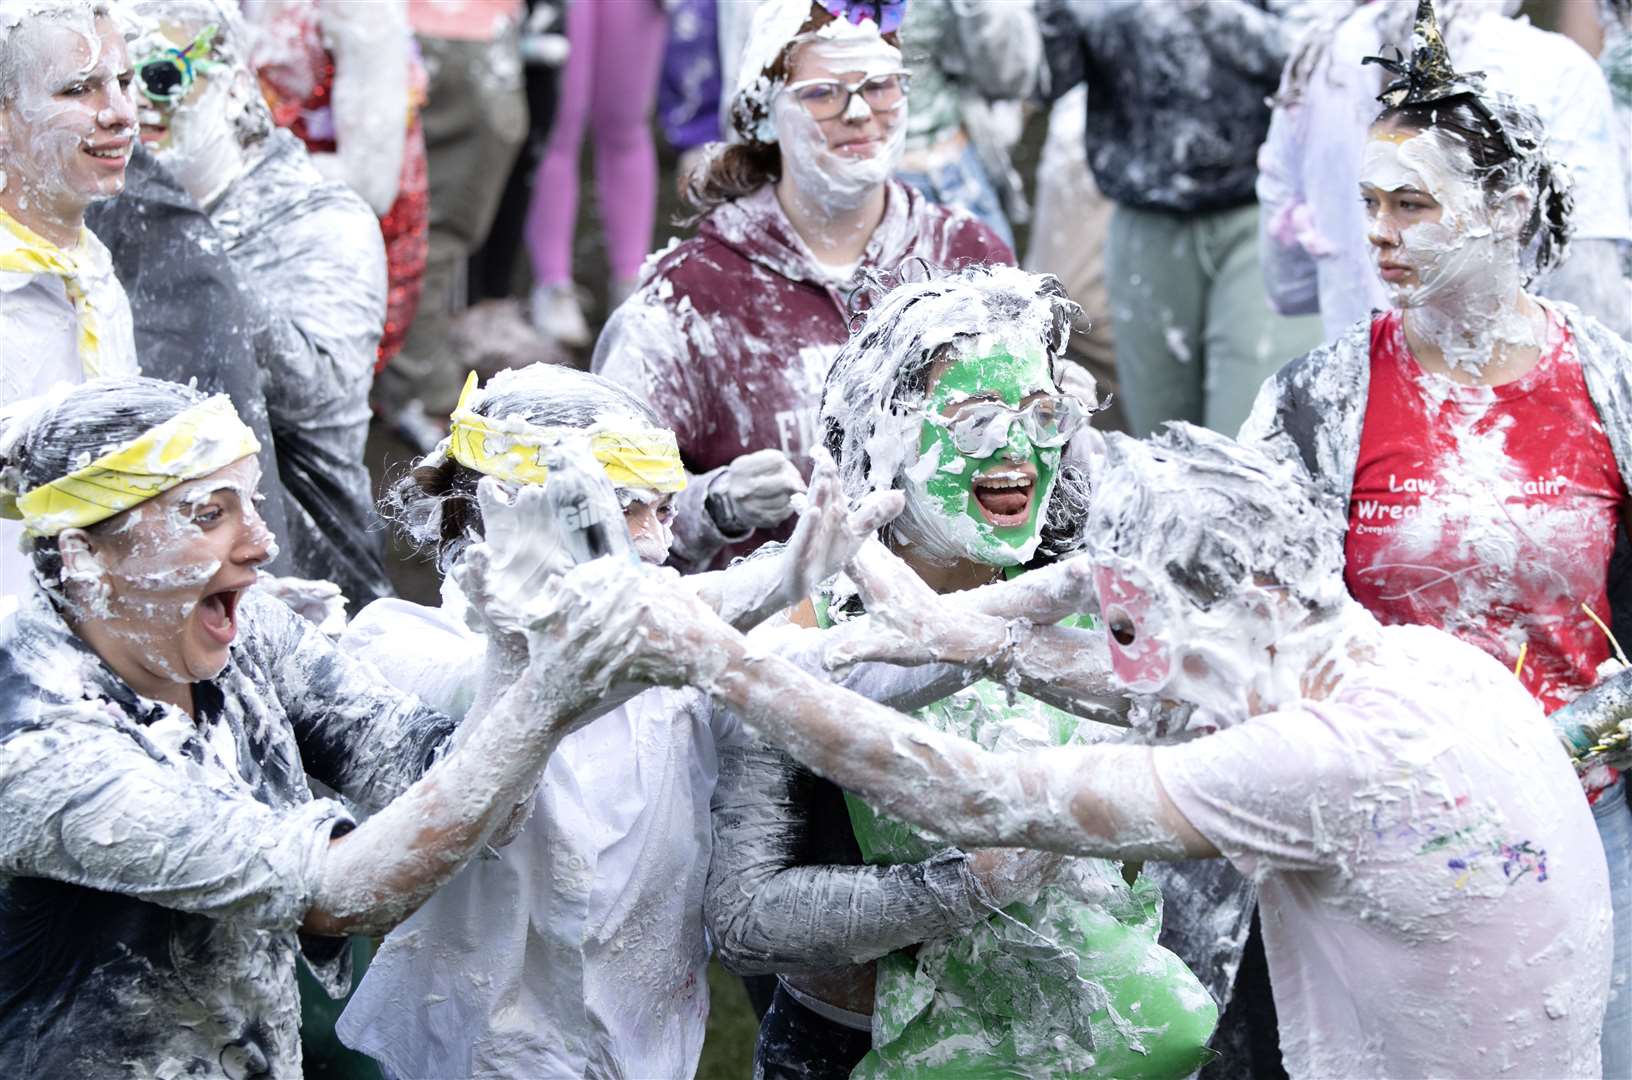 Students take part in the traditional Raisin Monday foam fight on St Salvator’s Lower College Lawn at the University of St Andrews in Fife in October (PA)